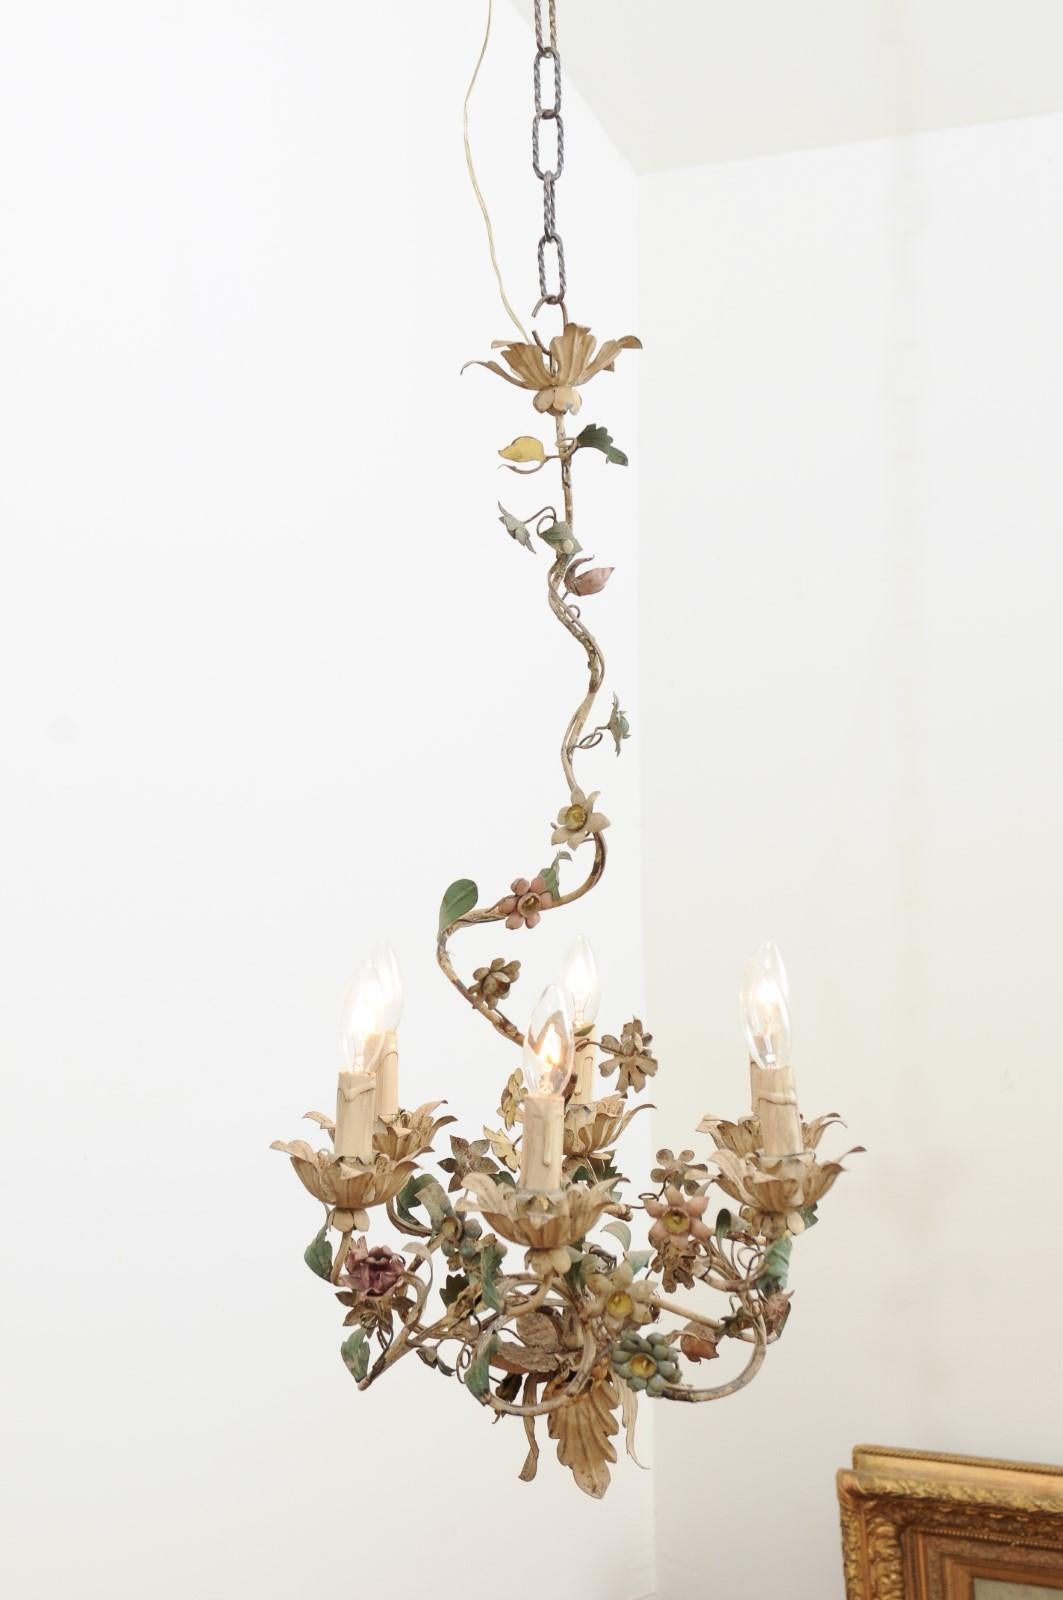 A French Belle Époque painted tôle chandelier from the late 19th century, with six lights and petite flowers. Created in France in the last quarter of the 19th century, this chandelier features a painted tôle structure adorned with delicate painted